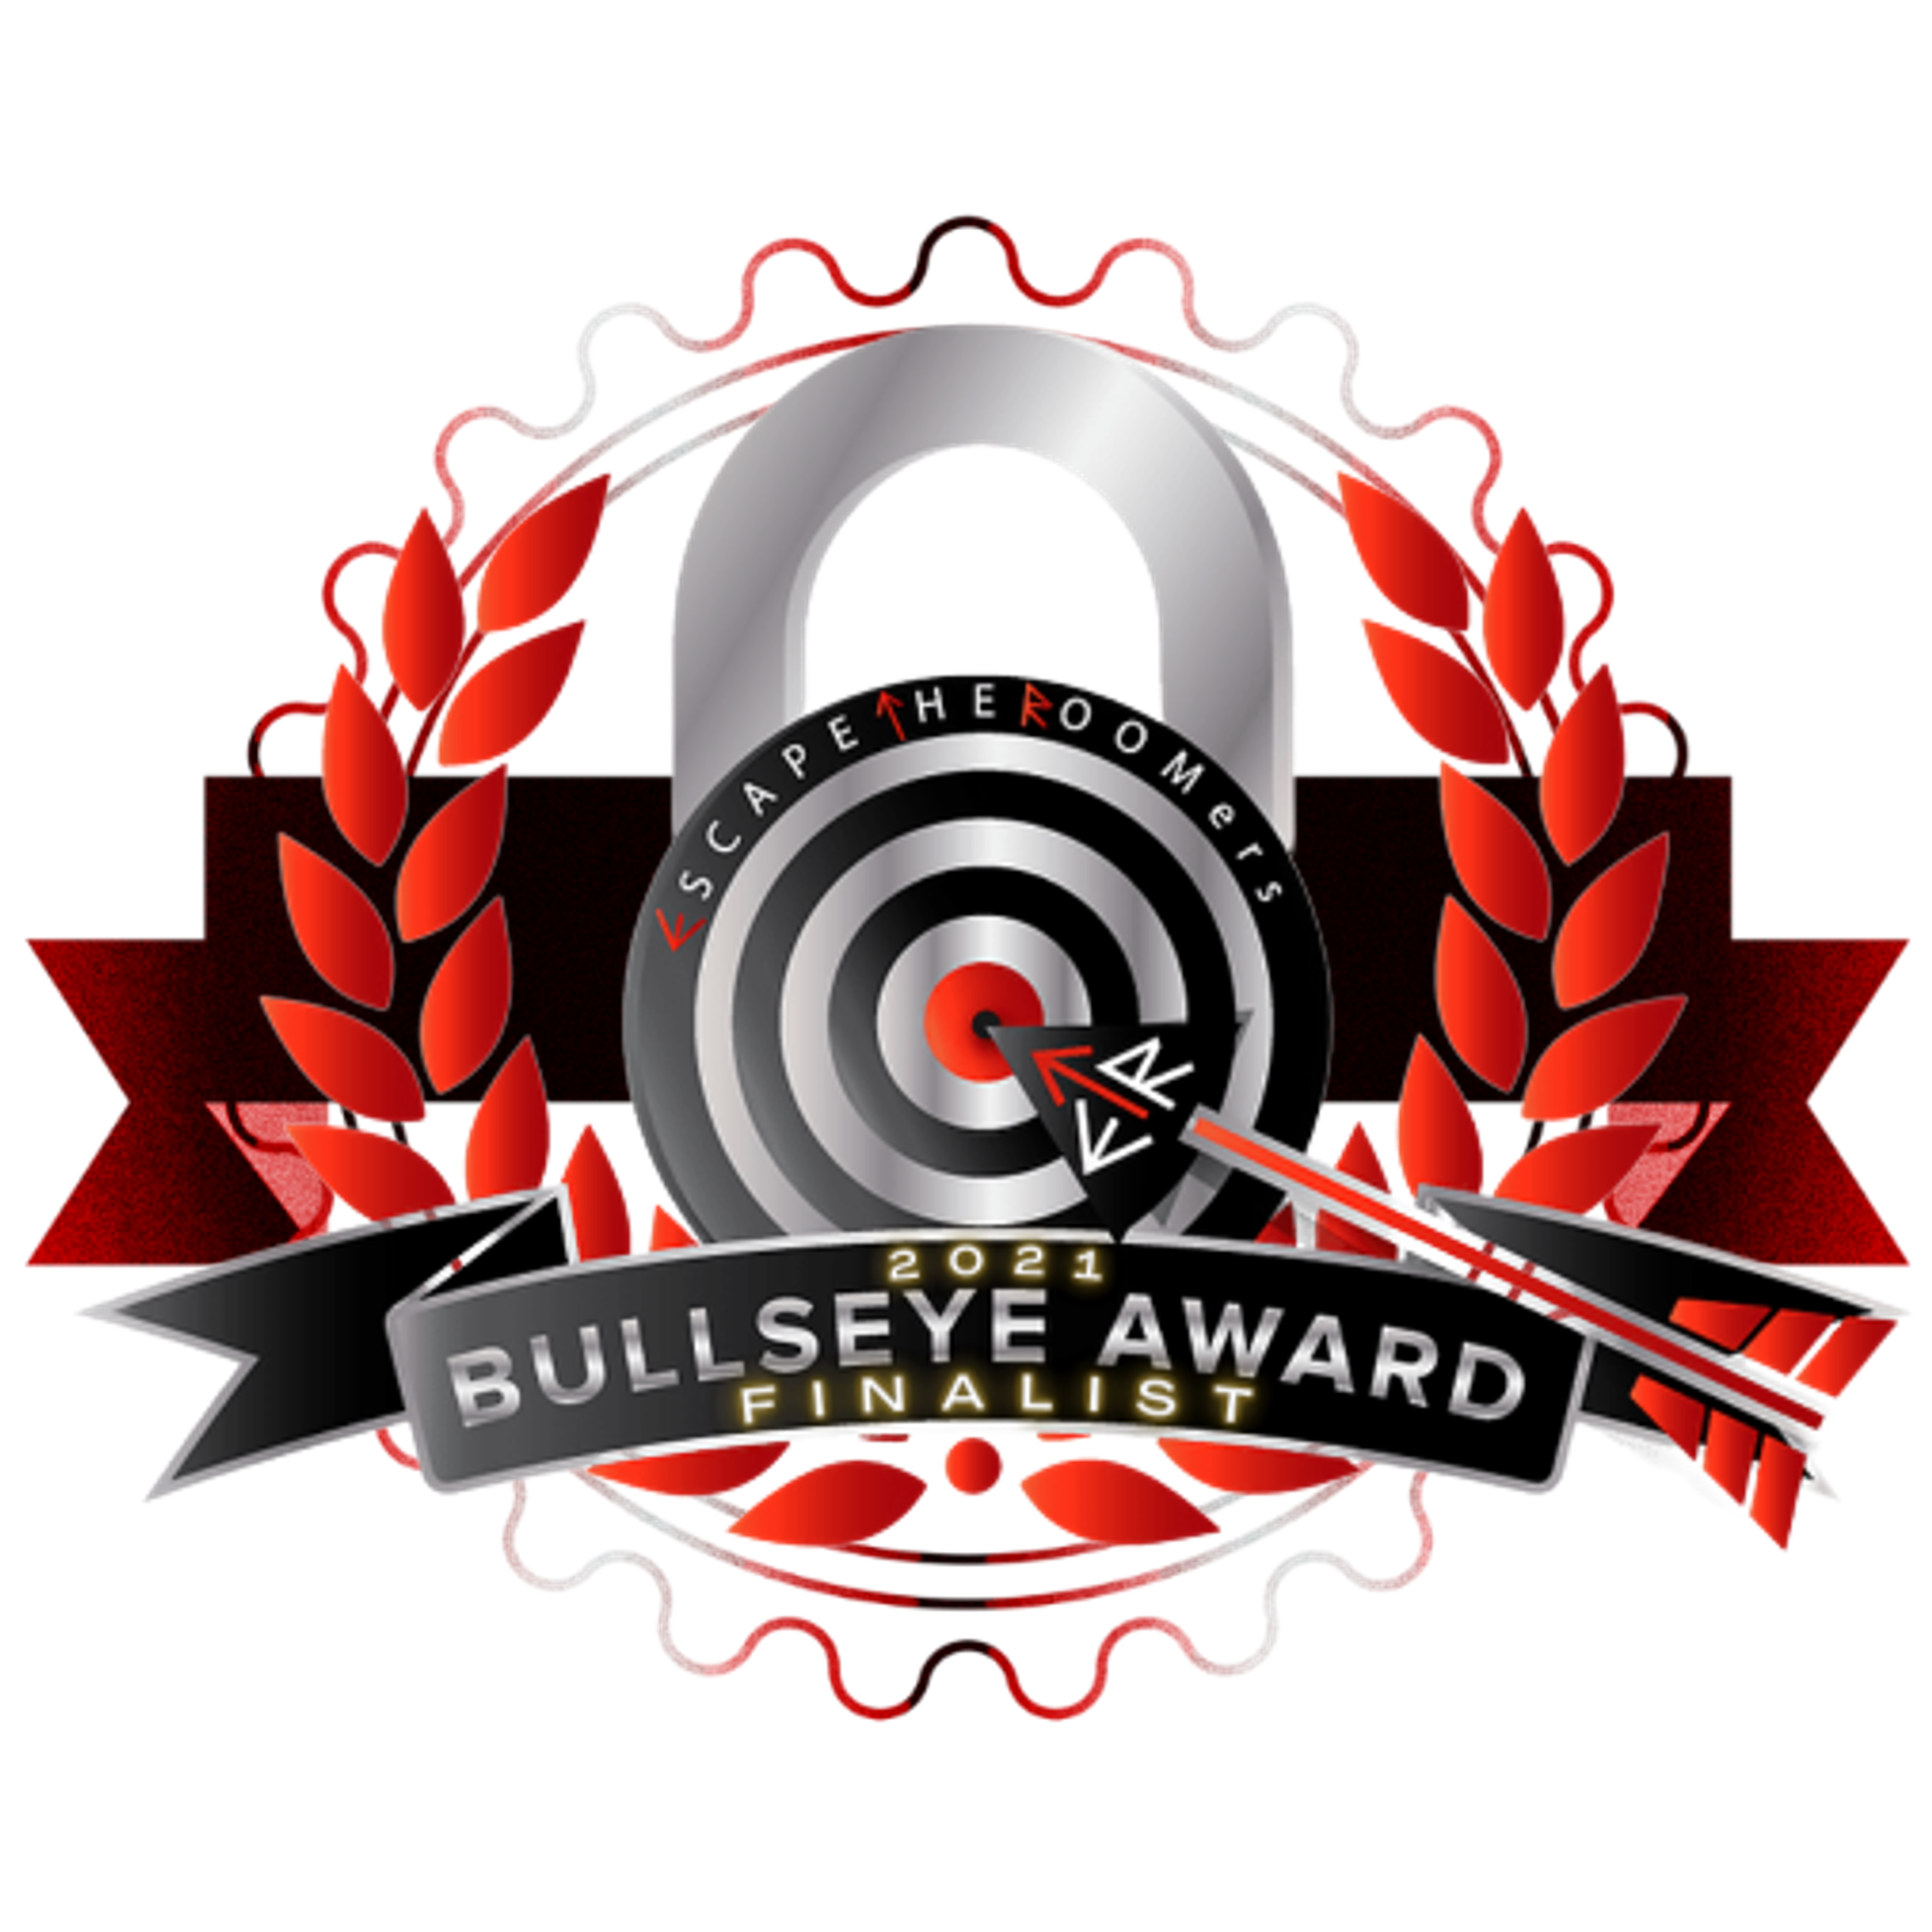 We're the finalists of the 2021 Bullseye Awards!